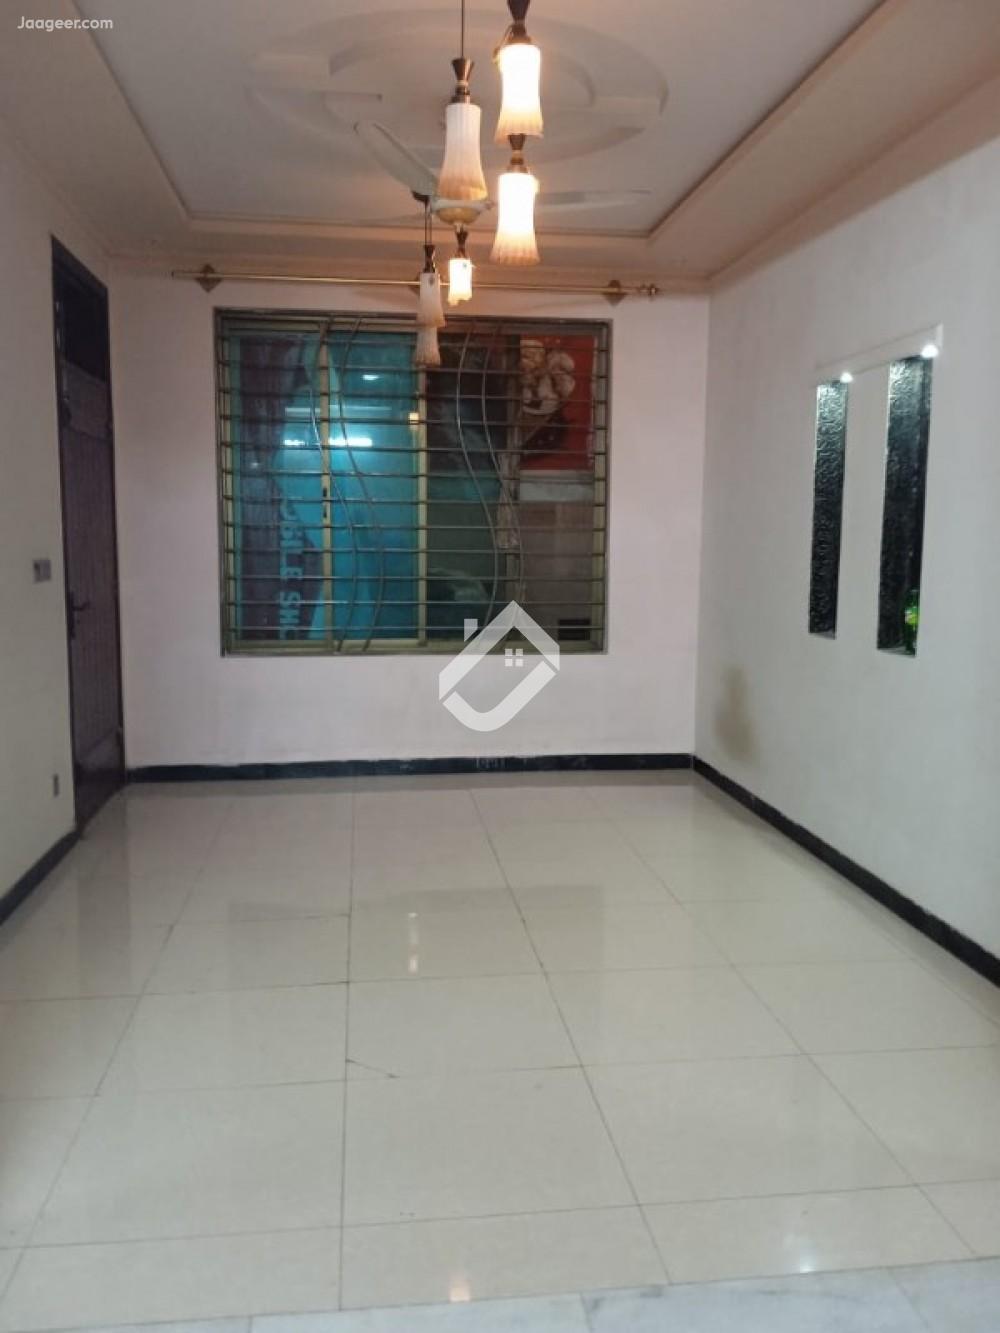 View  5 Marla Lower Portion House For Rent In Airport Housing Society in Airport Housing Society, Rawalpindi